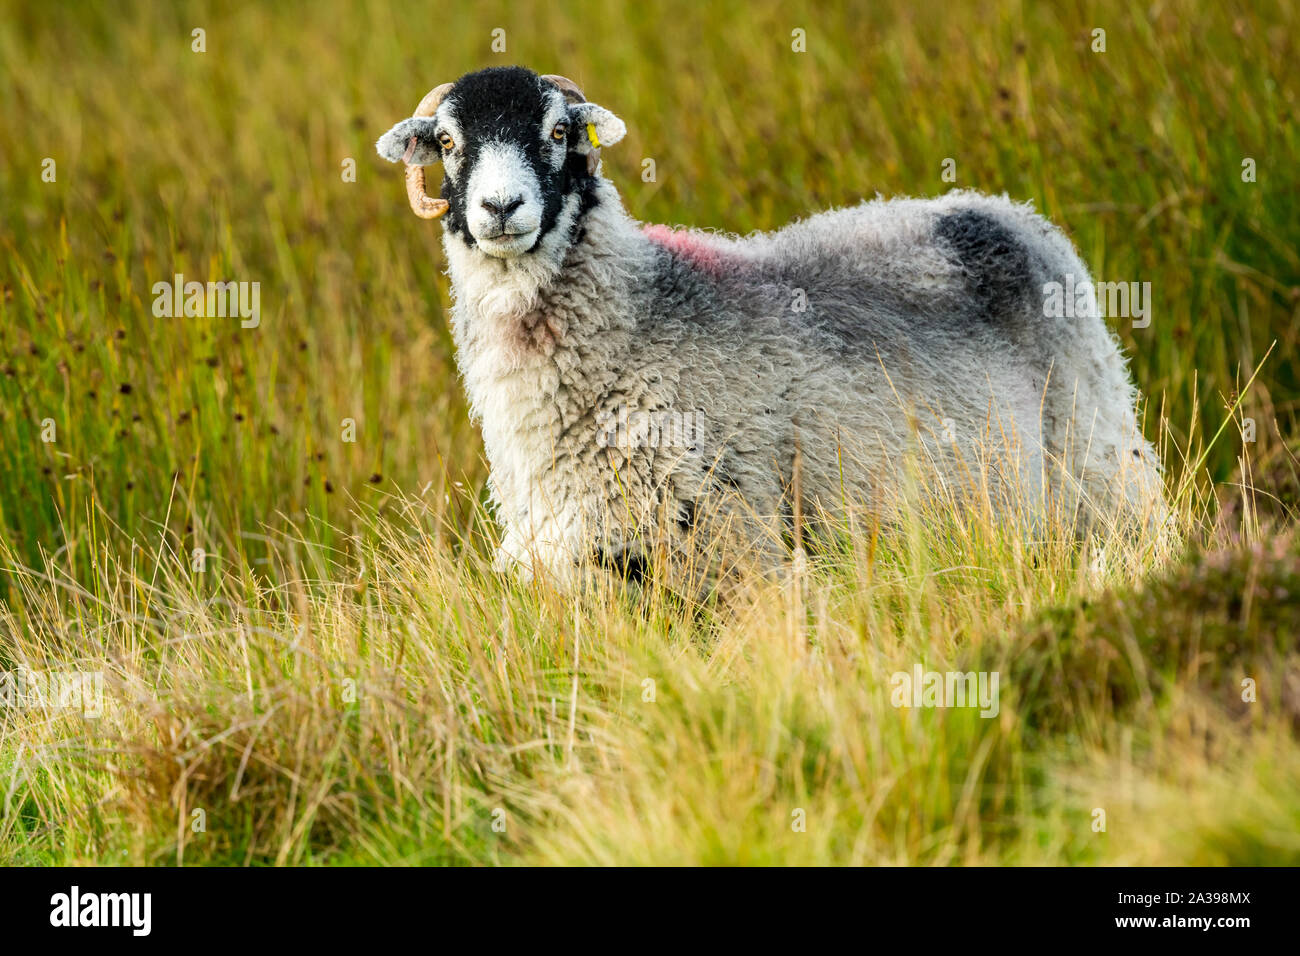 Swaledale sheep, a ewe, or female sheep stood in rough pasture land in Yorkshire Dales.  Facing left.  Landscape, Horizontal, Space for copy. Stock Photo